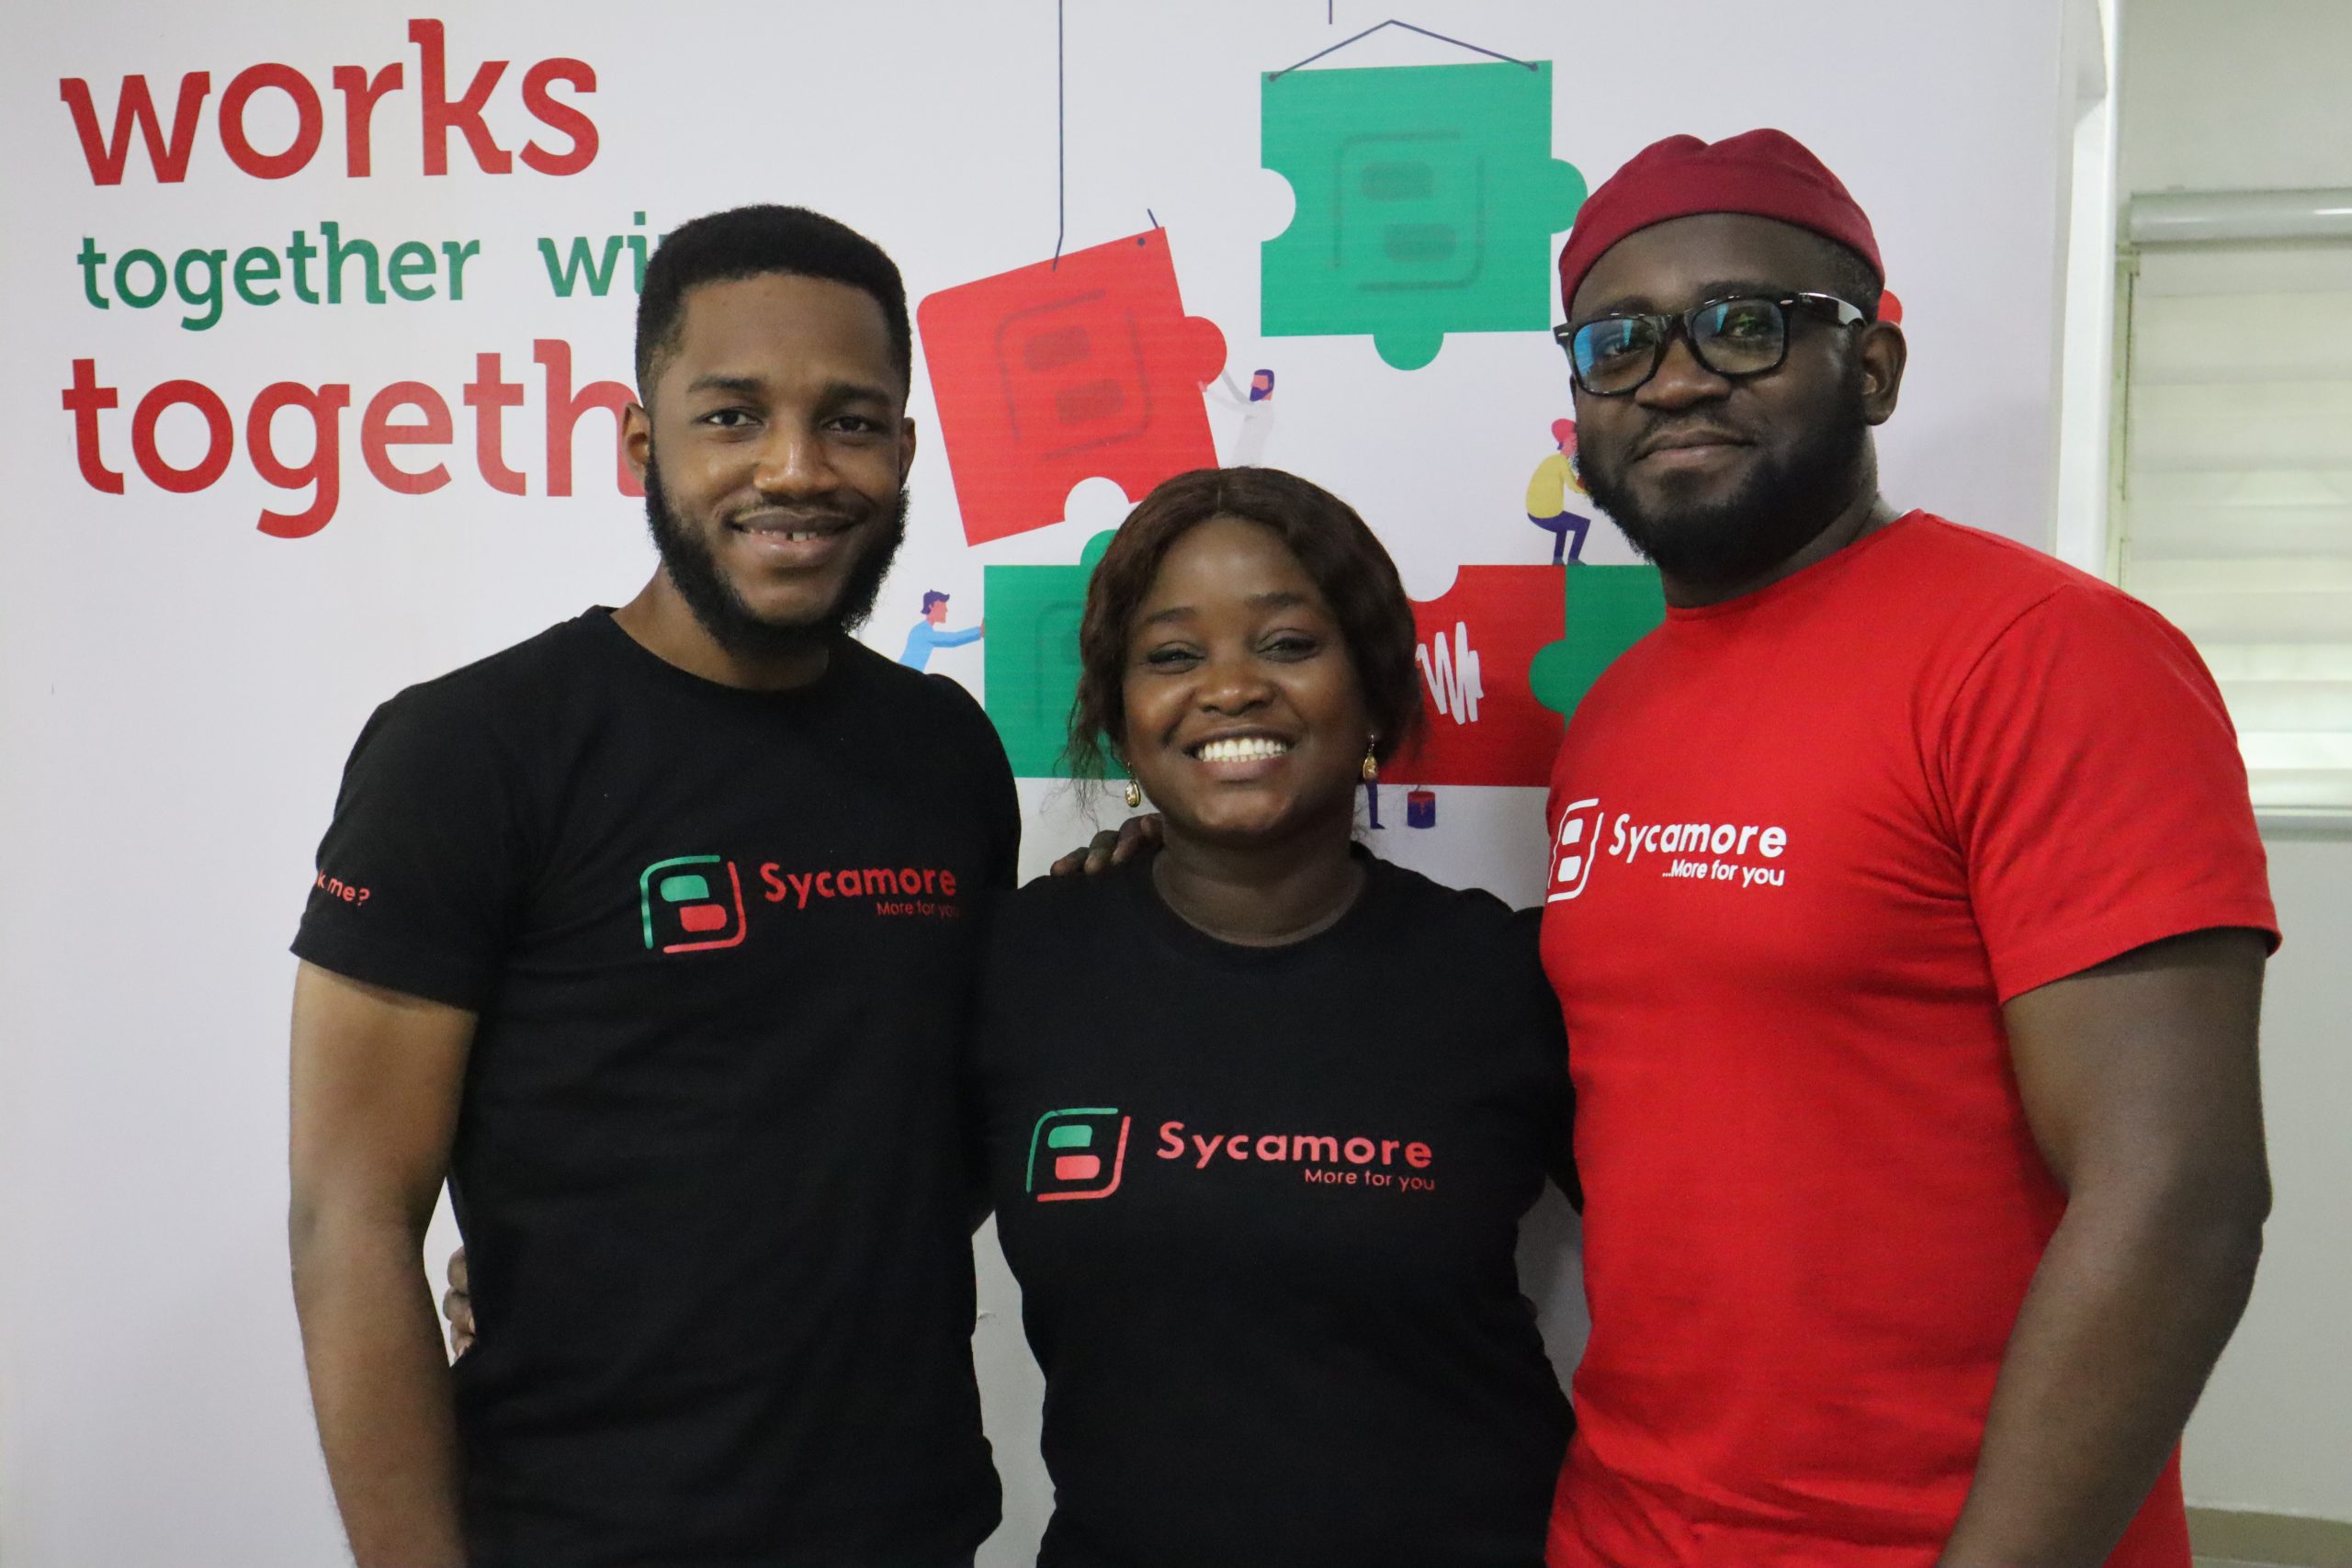 Sycamore, Nigerian fintech simplify loans, investments